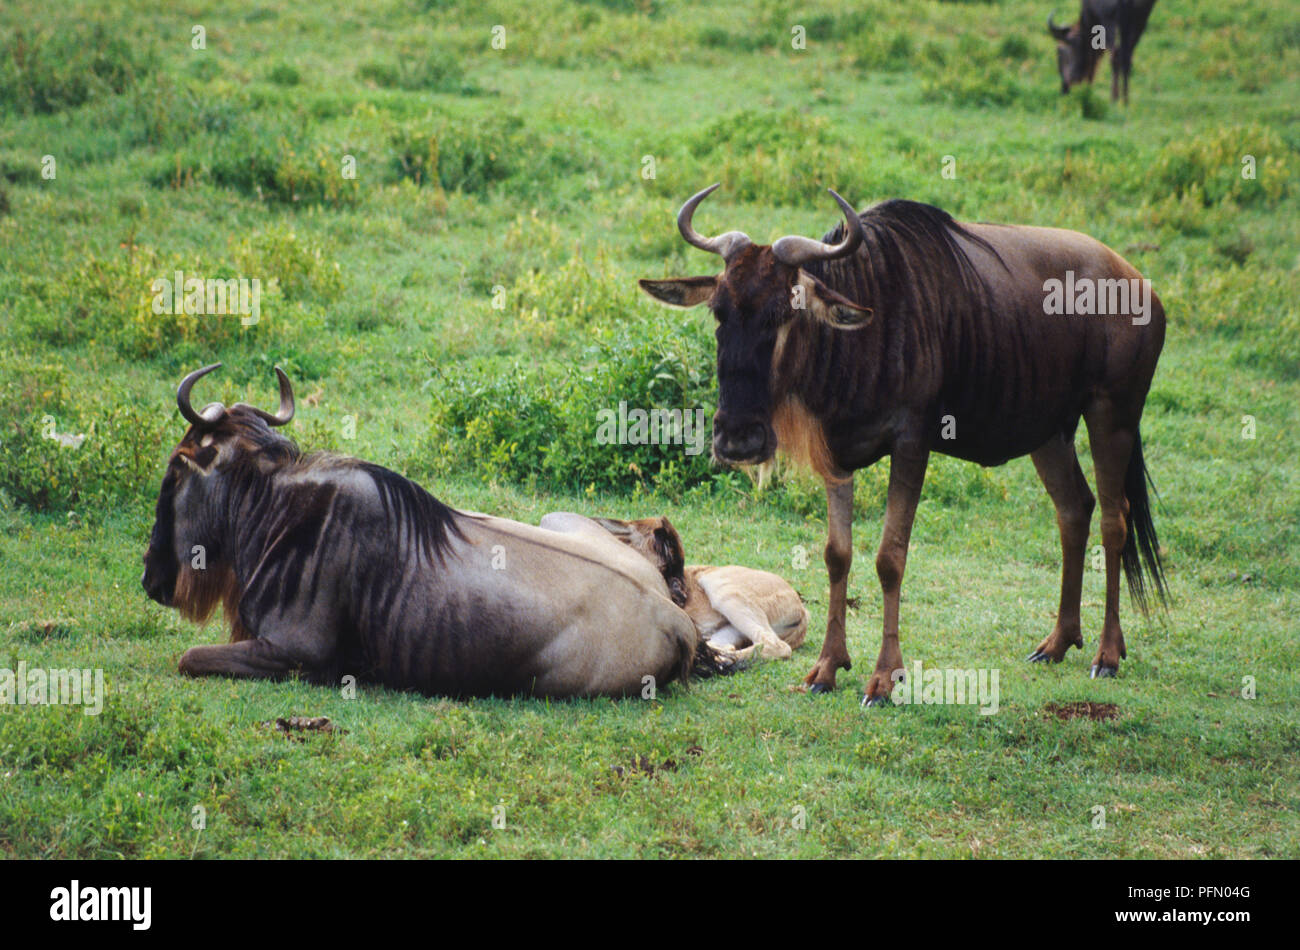 Wildebeest, Connochaetes taurinus, grazing in open grassland, young wildebeest behind adult lying down, another standing, dark brown body, long dark mane, white beard, long curled horns, long tail. Stock Photo